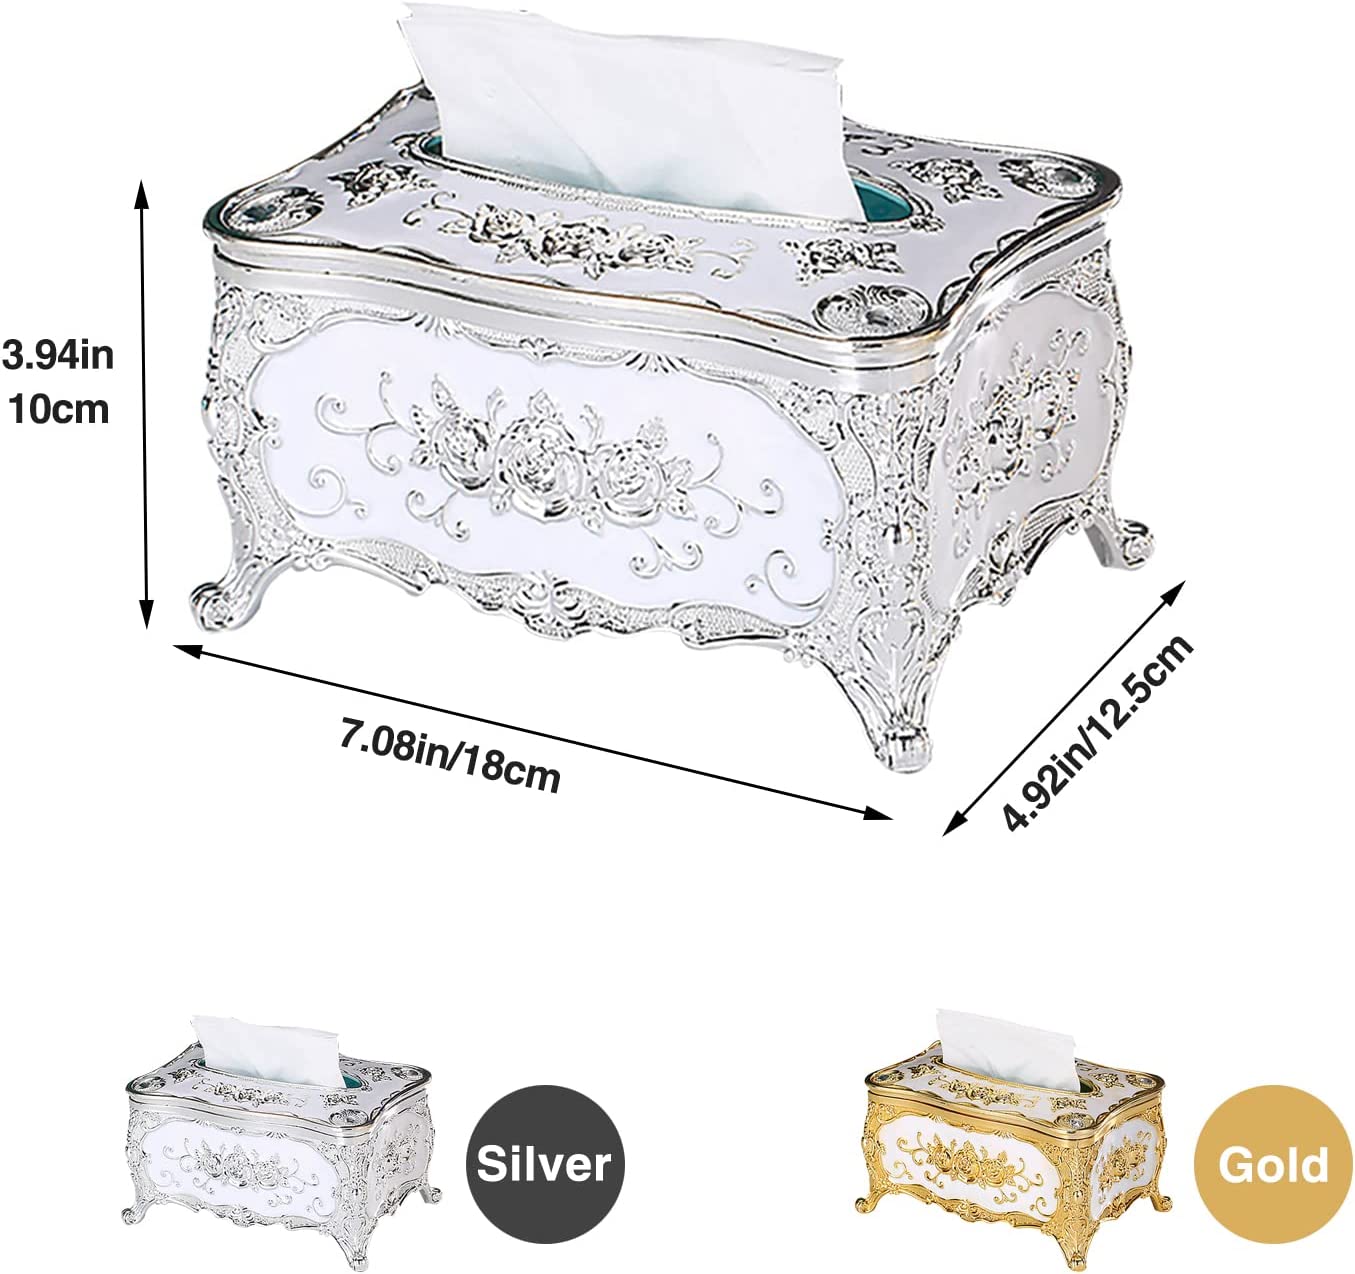 SCAEHKUY Retro Household Tissue Box Rectangular Multifunction Tissue Box Cover for Bathroom Vanity Countertops Bedroom Dressers and Tables Silver Plastic Tissue Holder